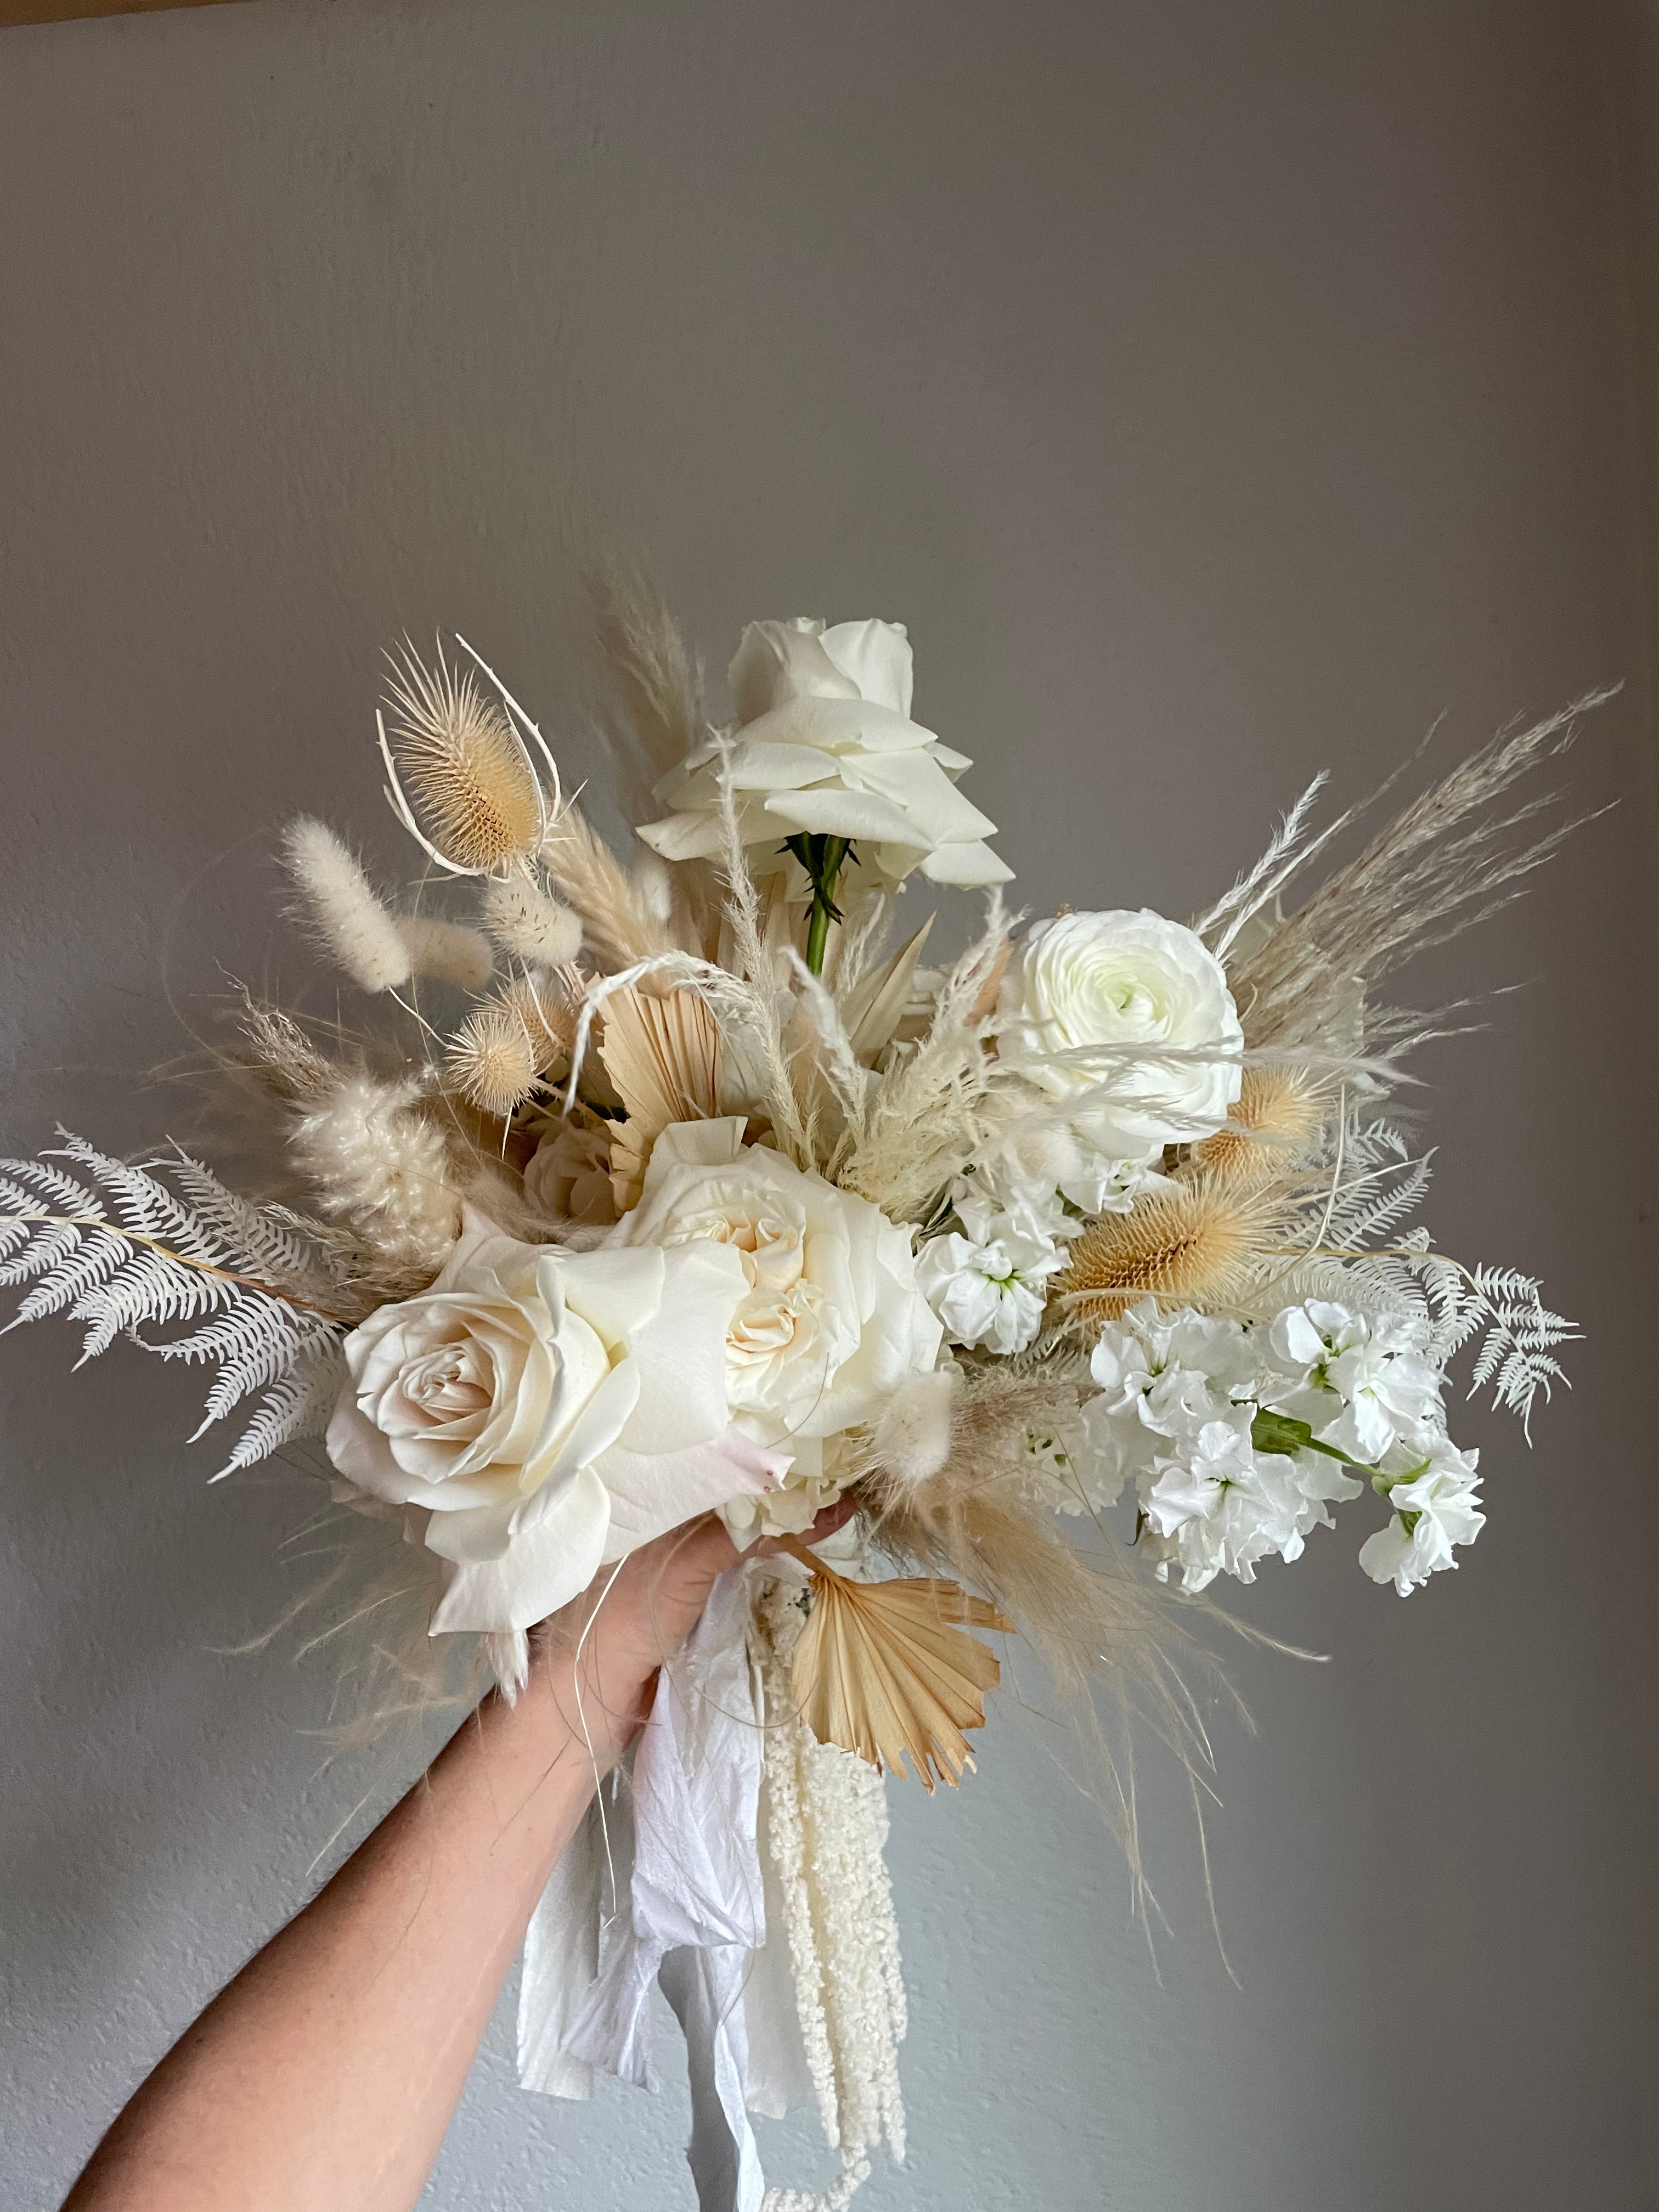 Pink and White Bridal Bouquet, Dried Flowers Bouquet, Dried